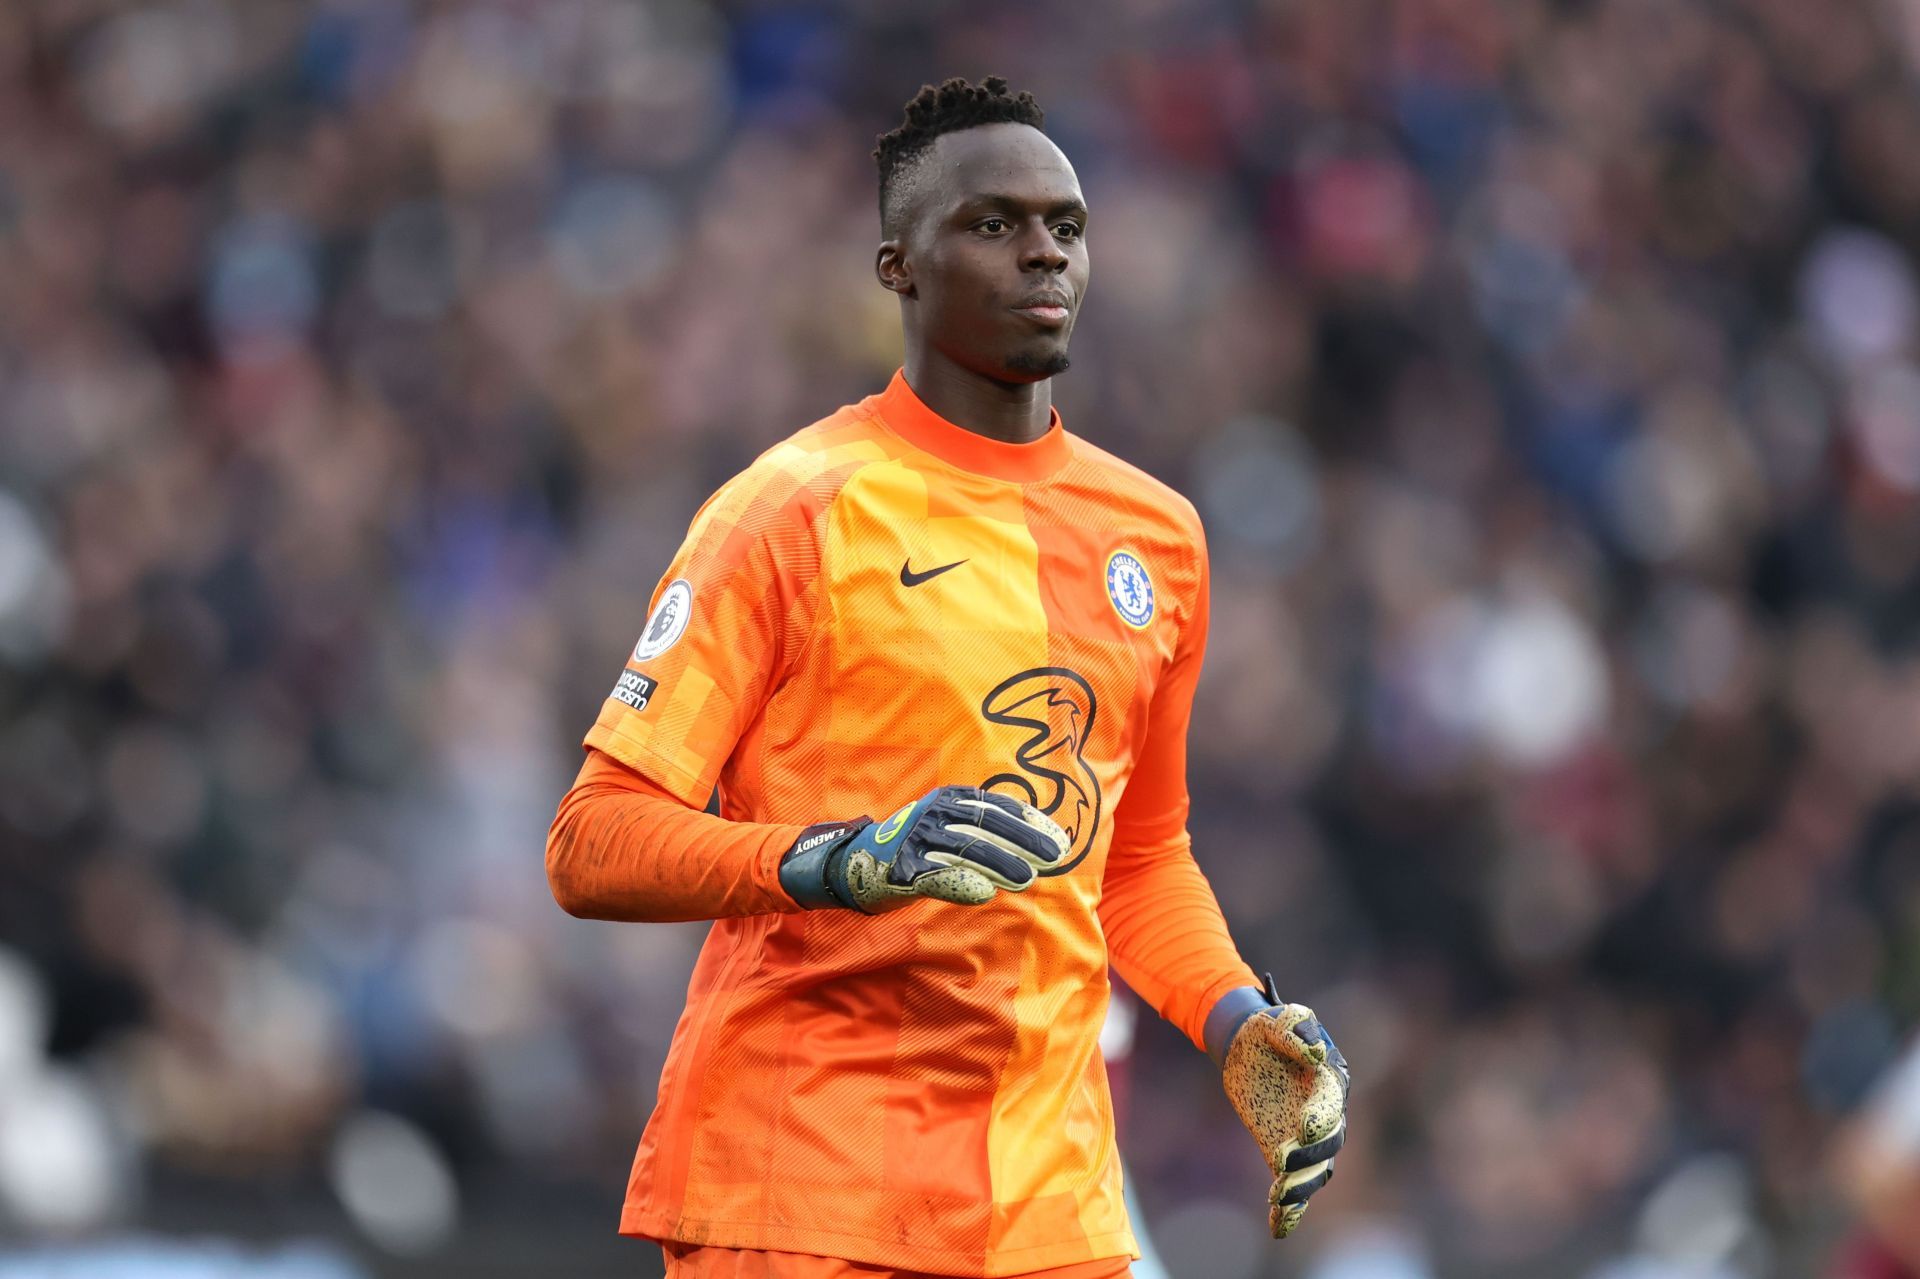 Edouard Mendy is one of the best goalkeepers in the Premier League right now.